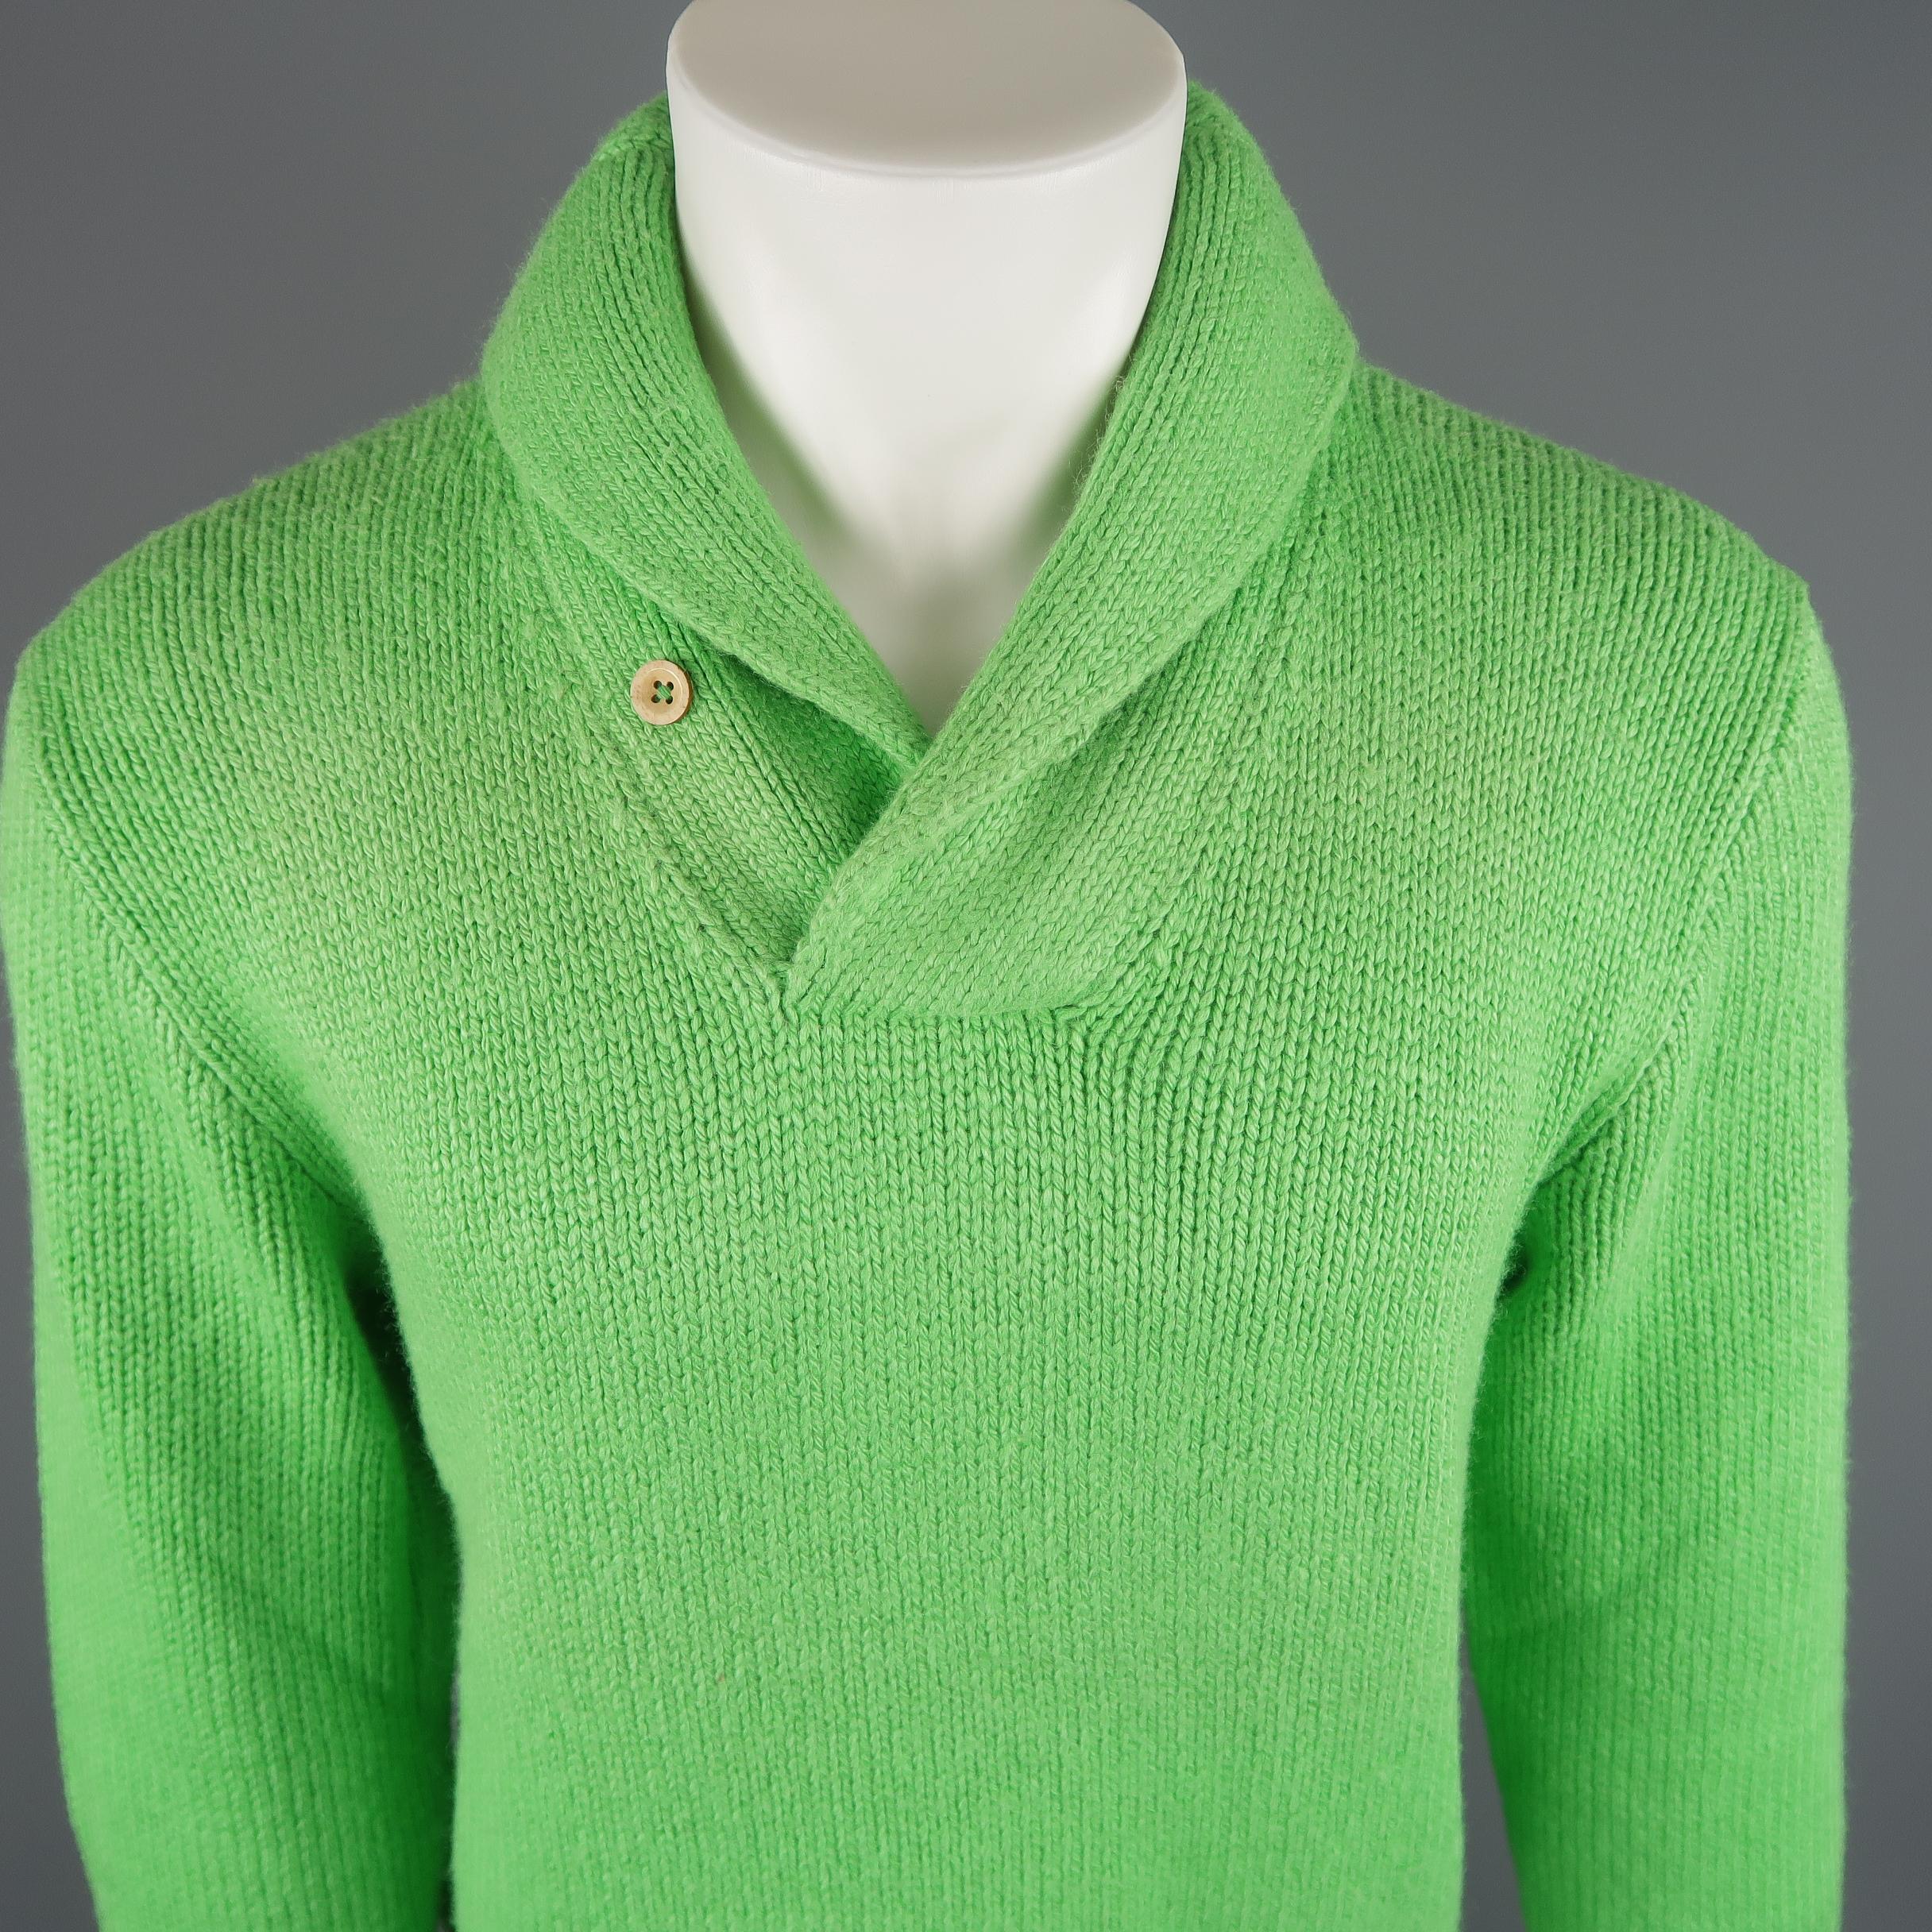 Polo By Ralph Lauren sweater comes in 100% Silk in a light green tone thick knit, with a shawl collar and ribbed cuff and waistband.
 
Good Pre-Owned Condition.
Marked: M
 
Measurements:
 
Shoulder: 19 in.
Chest: 22 in.
Sleeve: 28.5 in.
Length: 26.5